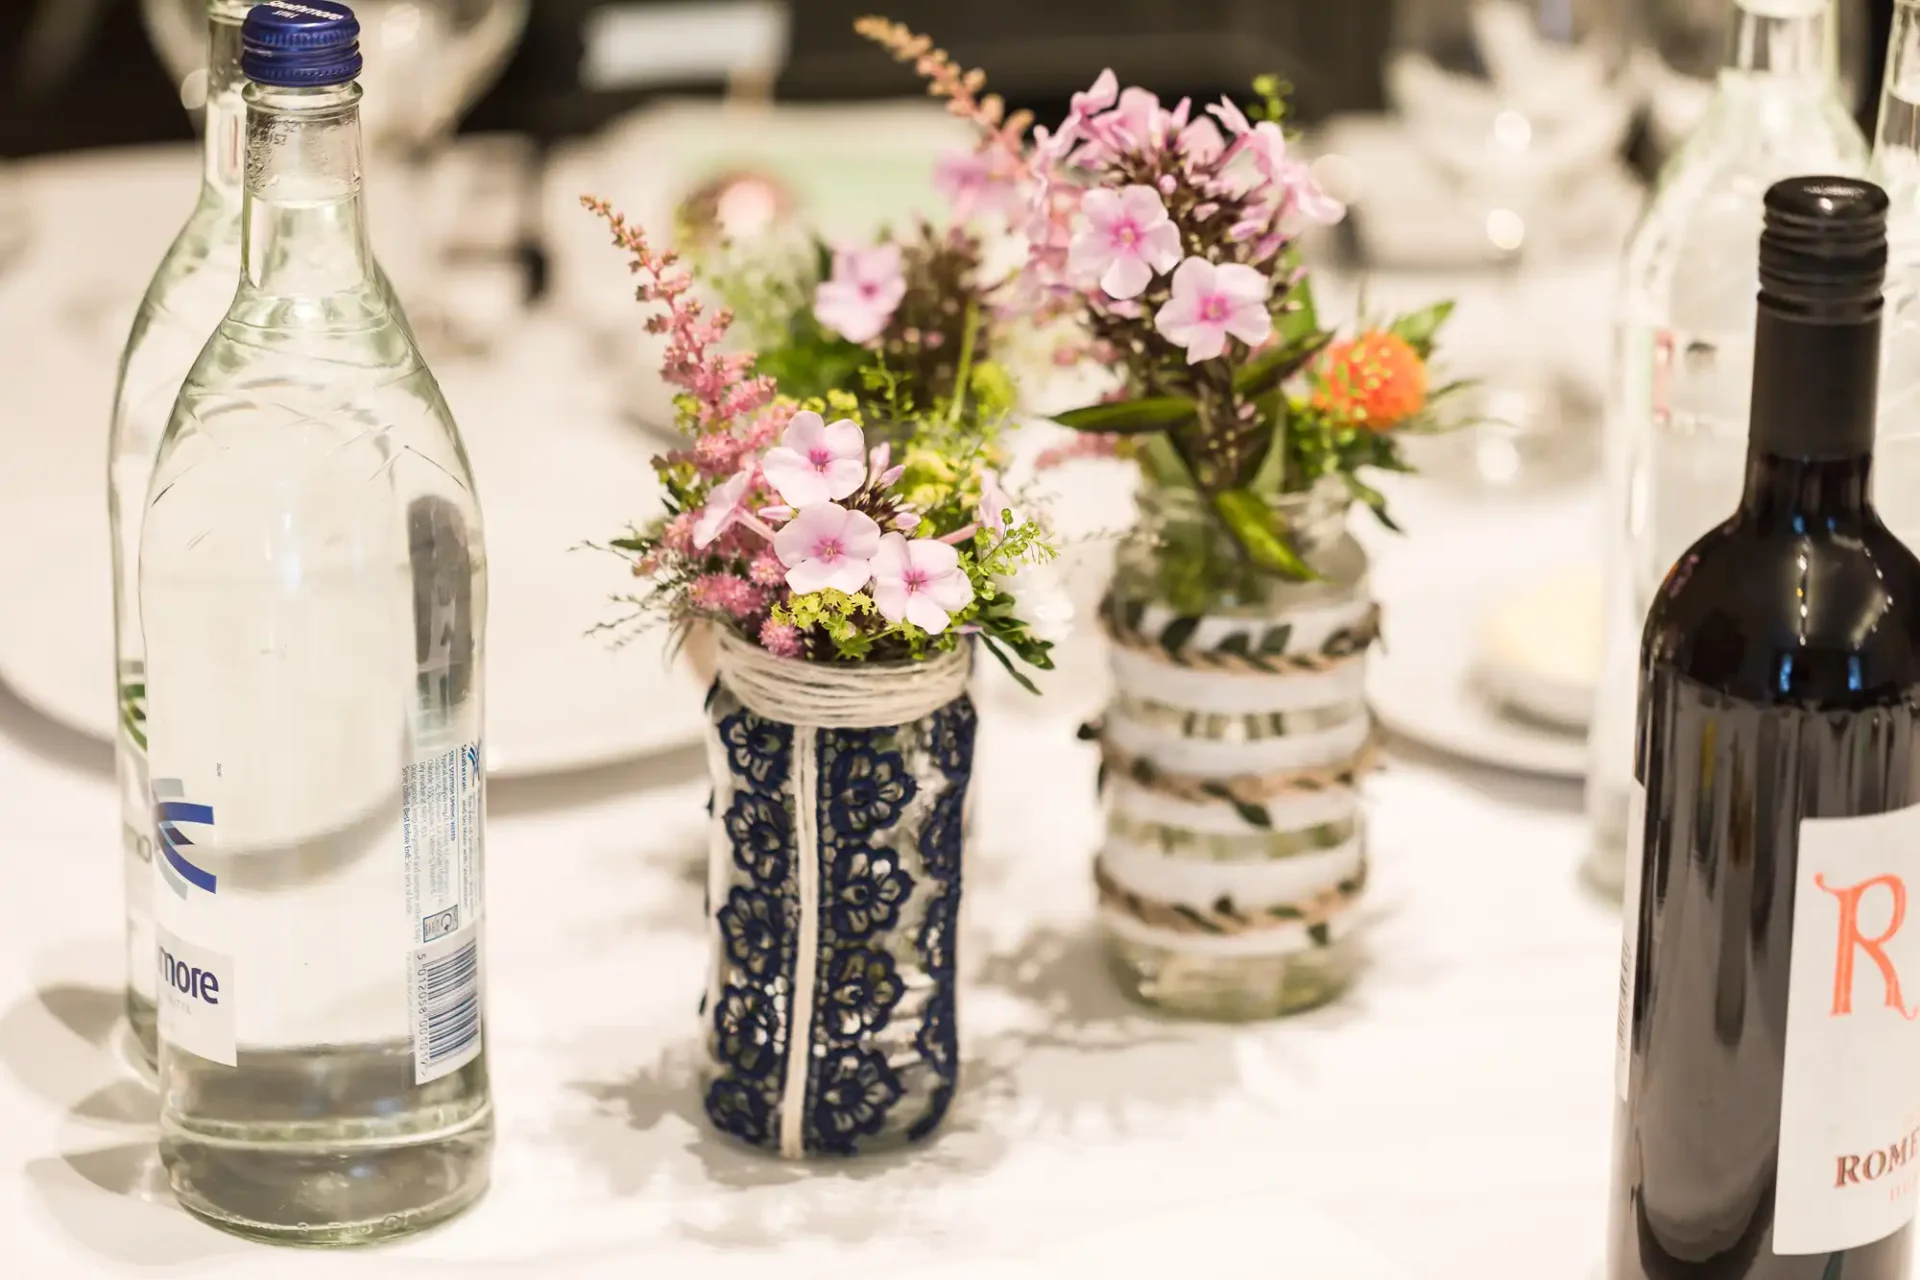 A table setting featuring a clear water bottle, a wine bottle, and small bouquets in decorative vases.